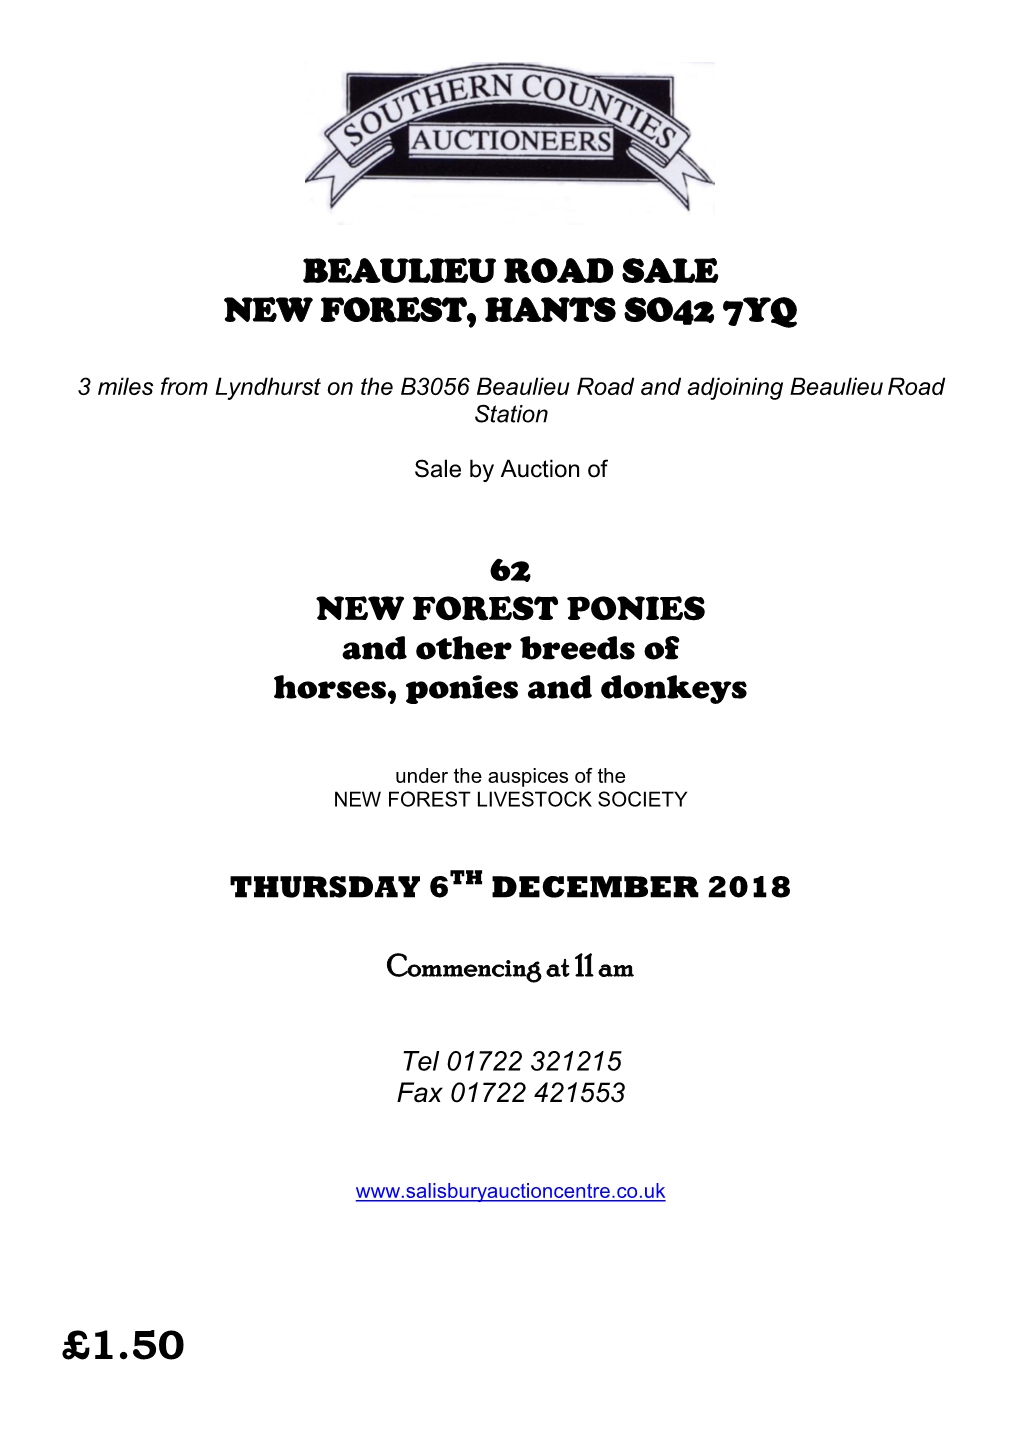 Catalogue and Also Under the Conditions of Sale Applicable to Southern Counties Auctioneers Horse Sales, a Full Copy of Which Is Available in the Auctioneers Office